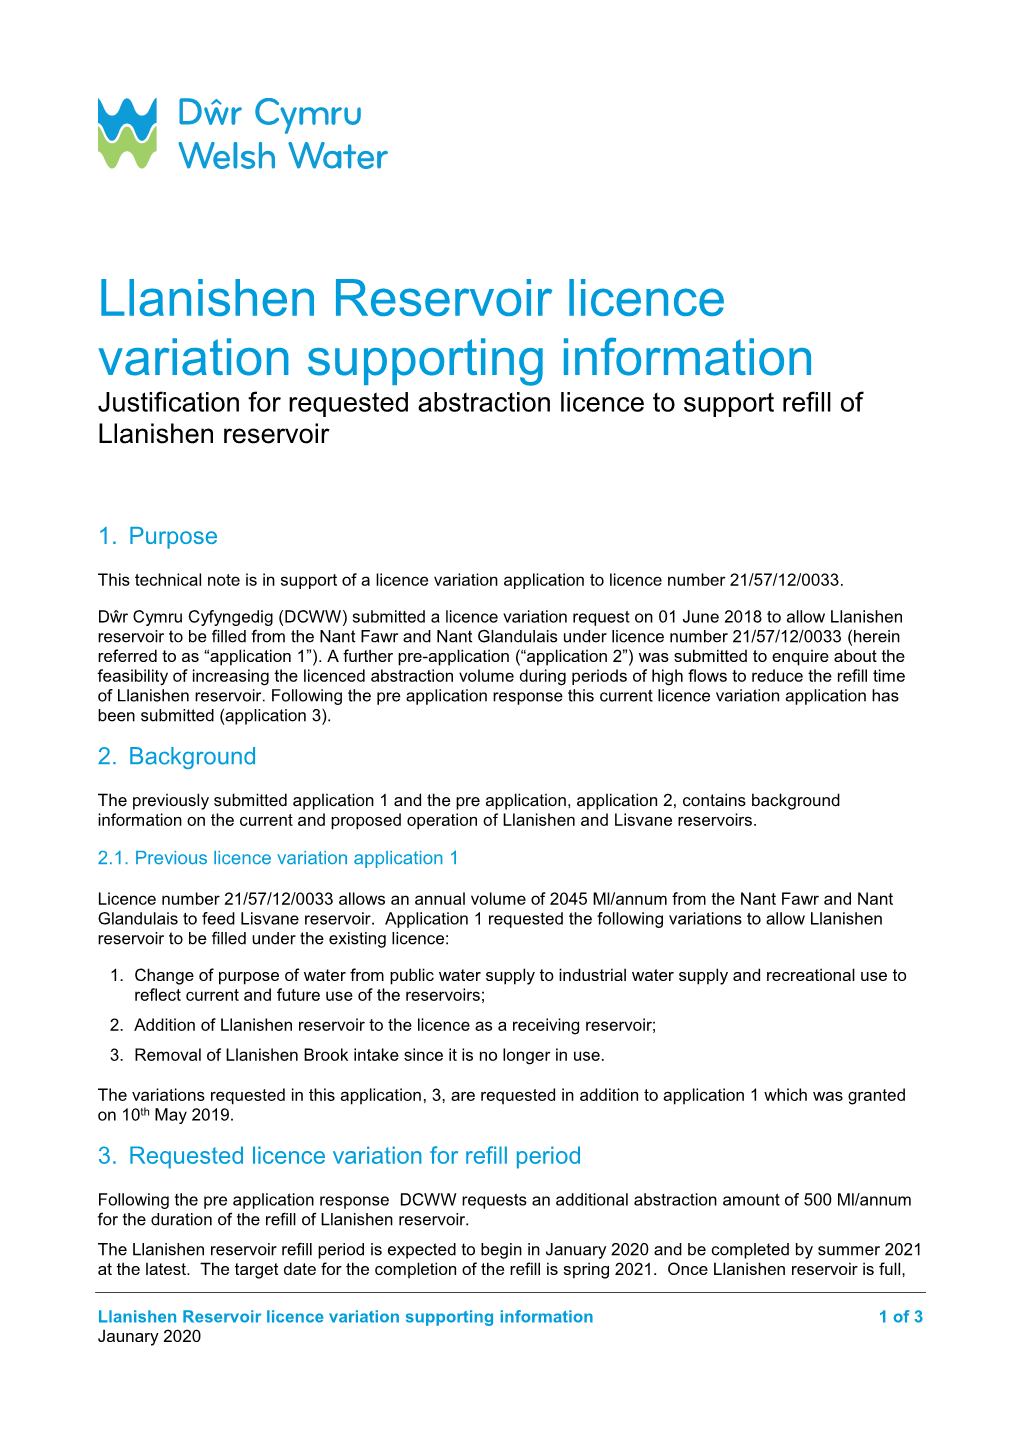 Llanishen Reservoir Licence Variation Supporting Information Justification for Requested Abstraction Licence to Support Refill of Llanishen Reservoir